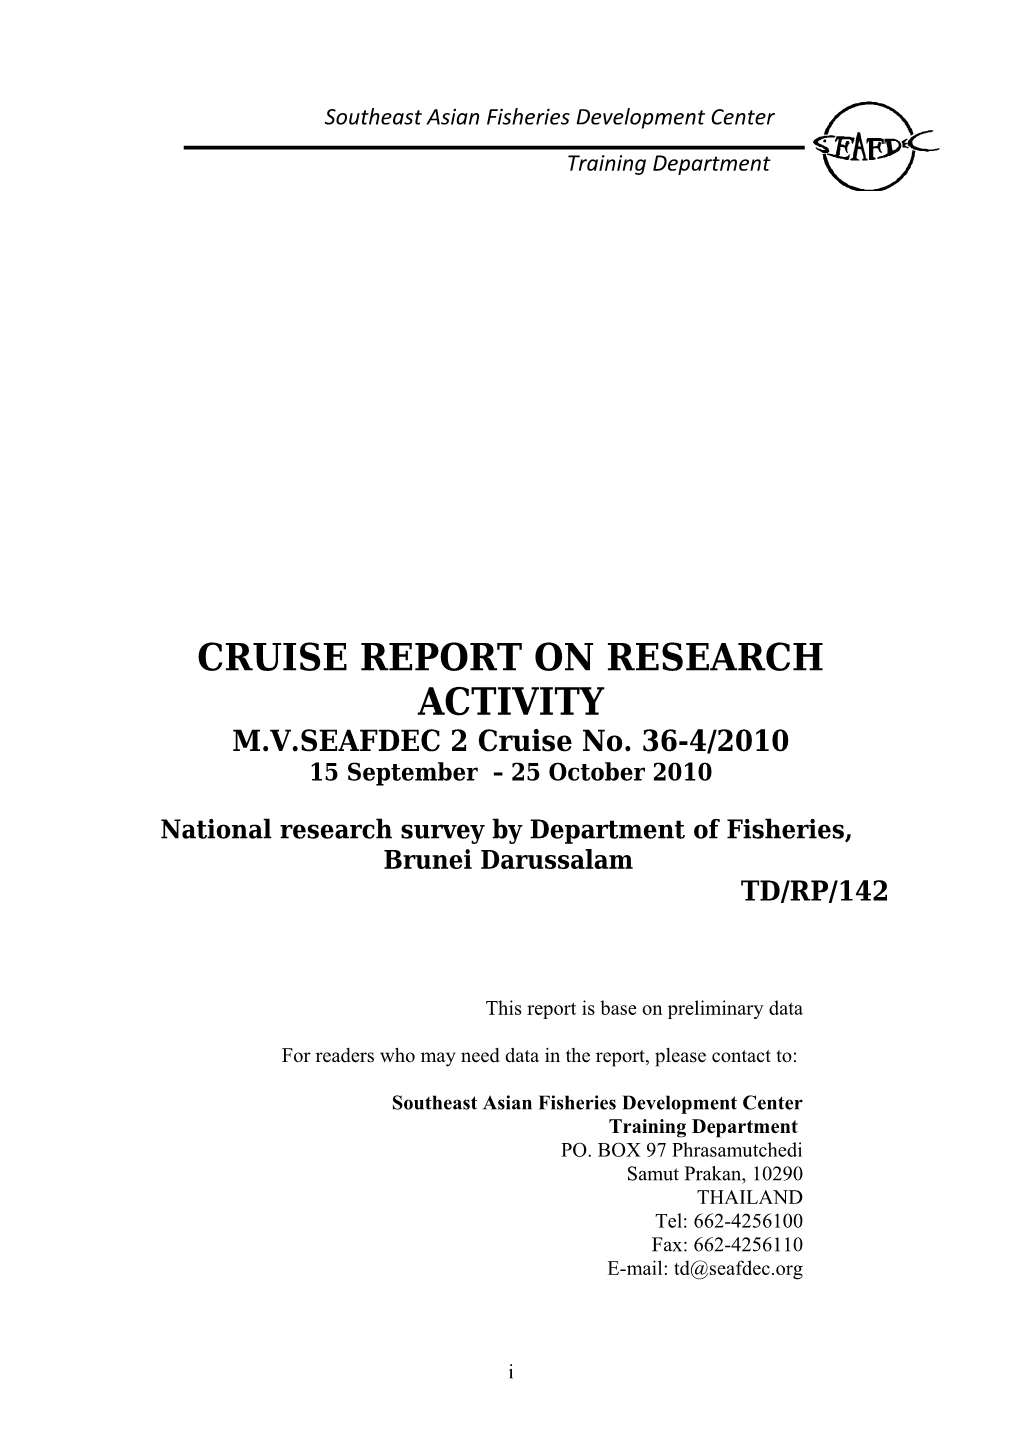 Cruise Report of Research Activity